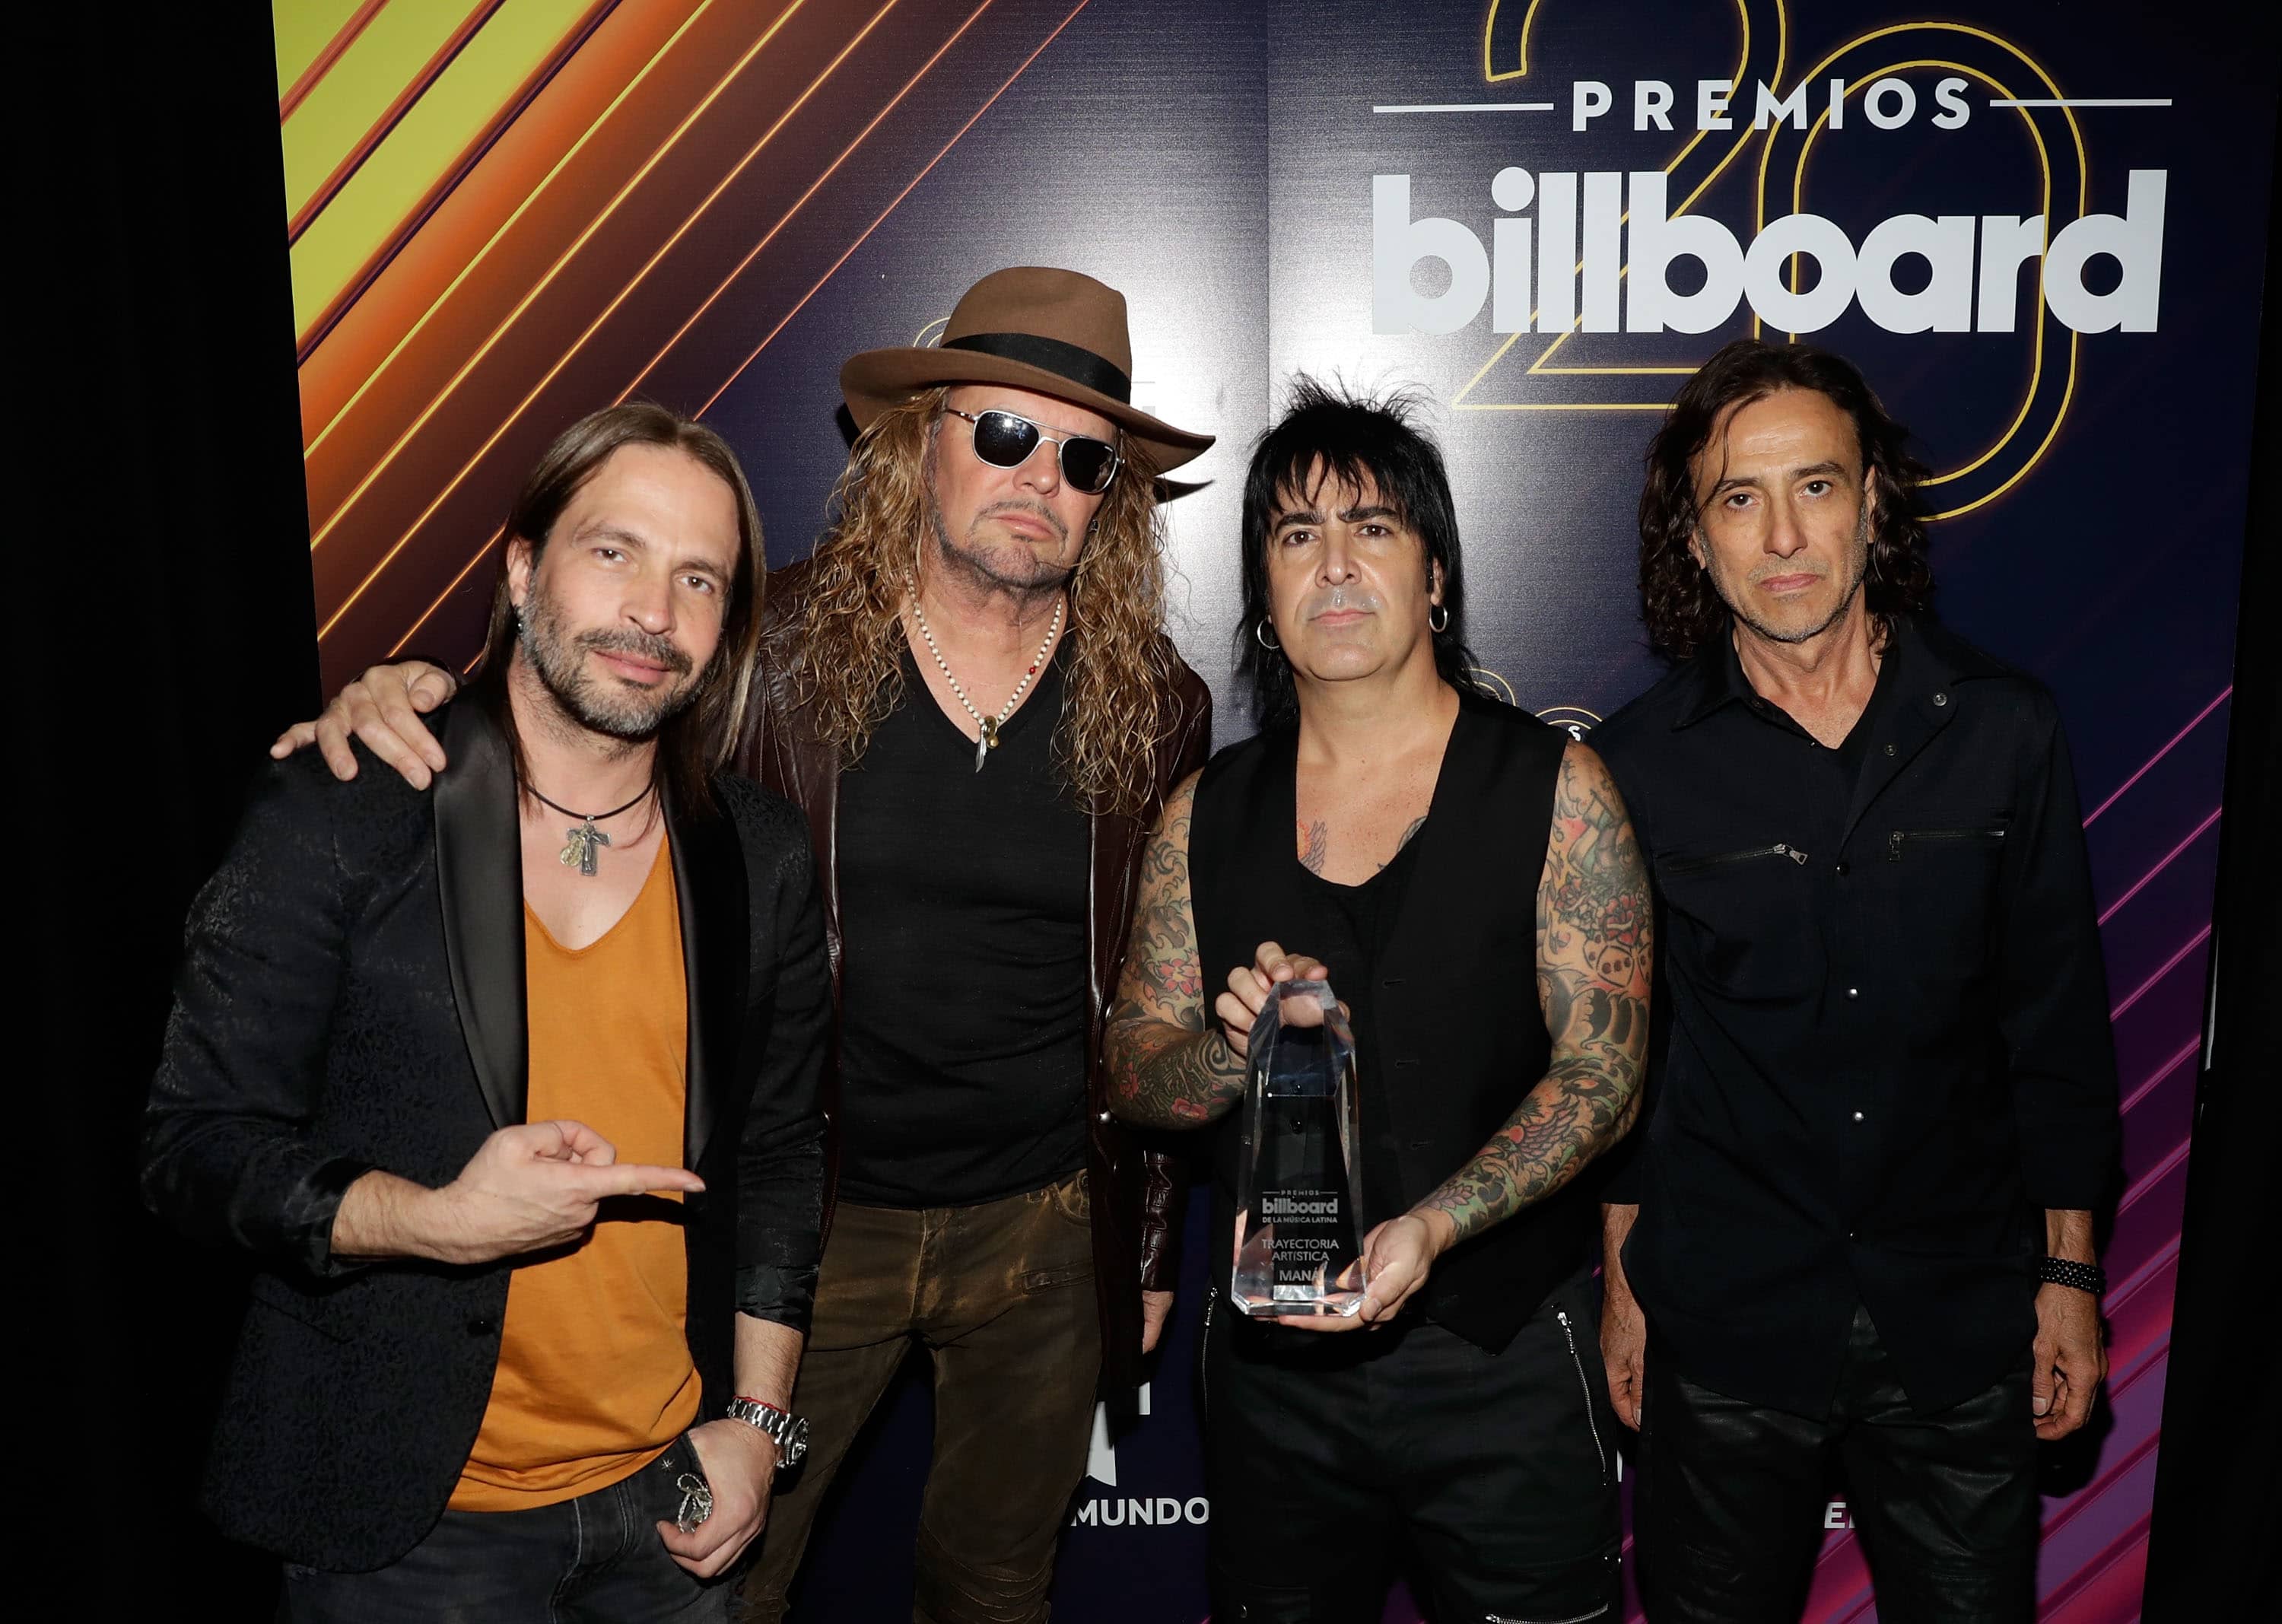 Mexican band Maná to be presented with Billboard Icon Award